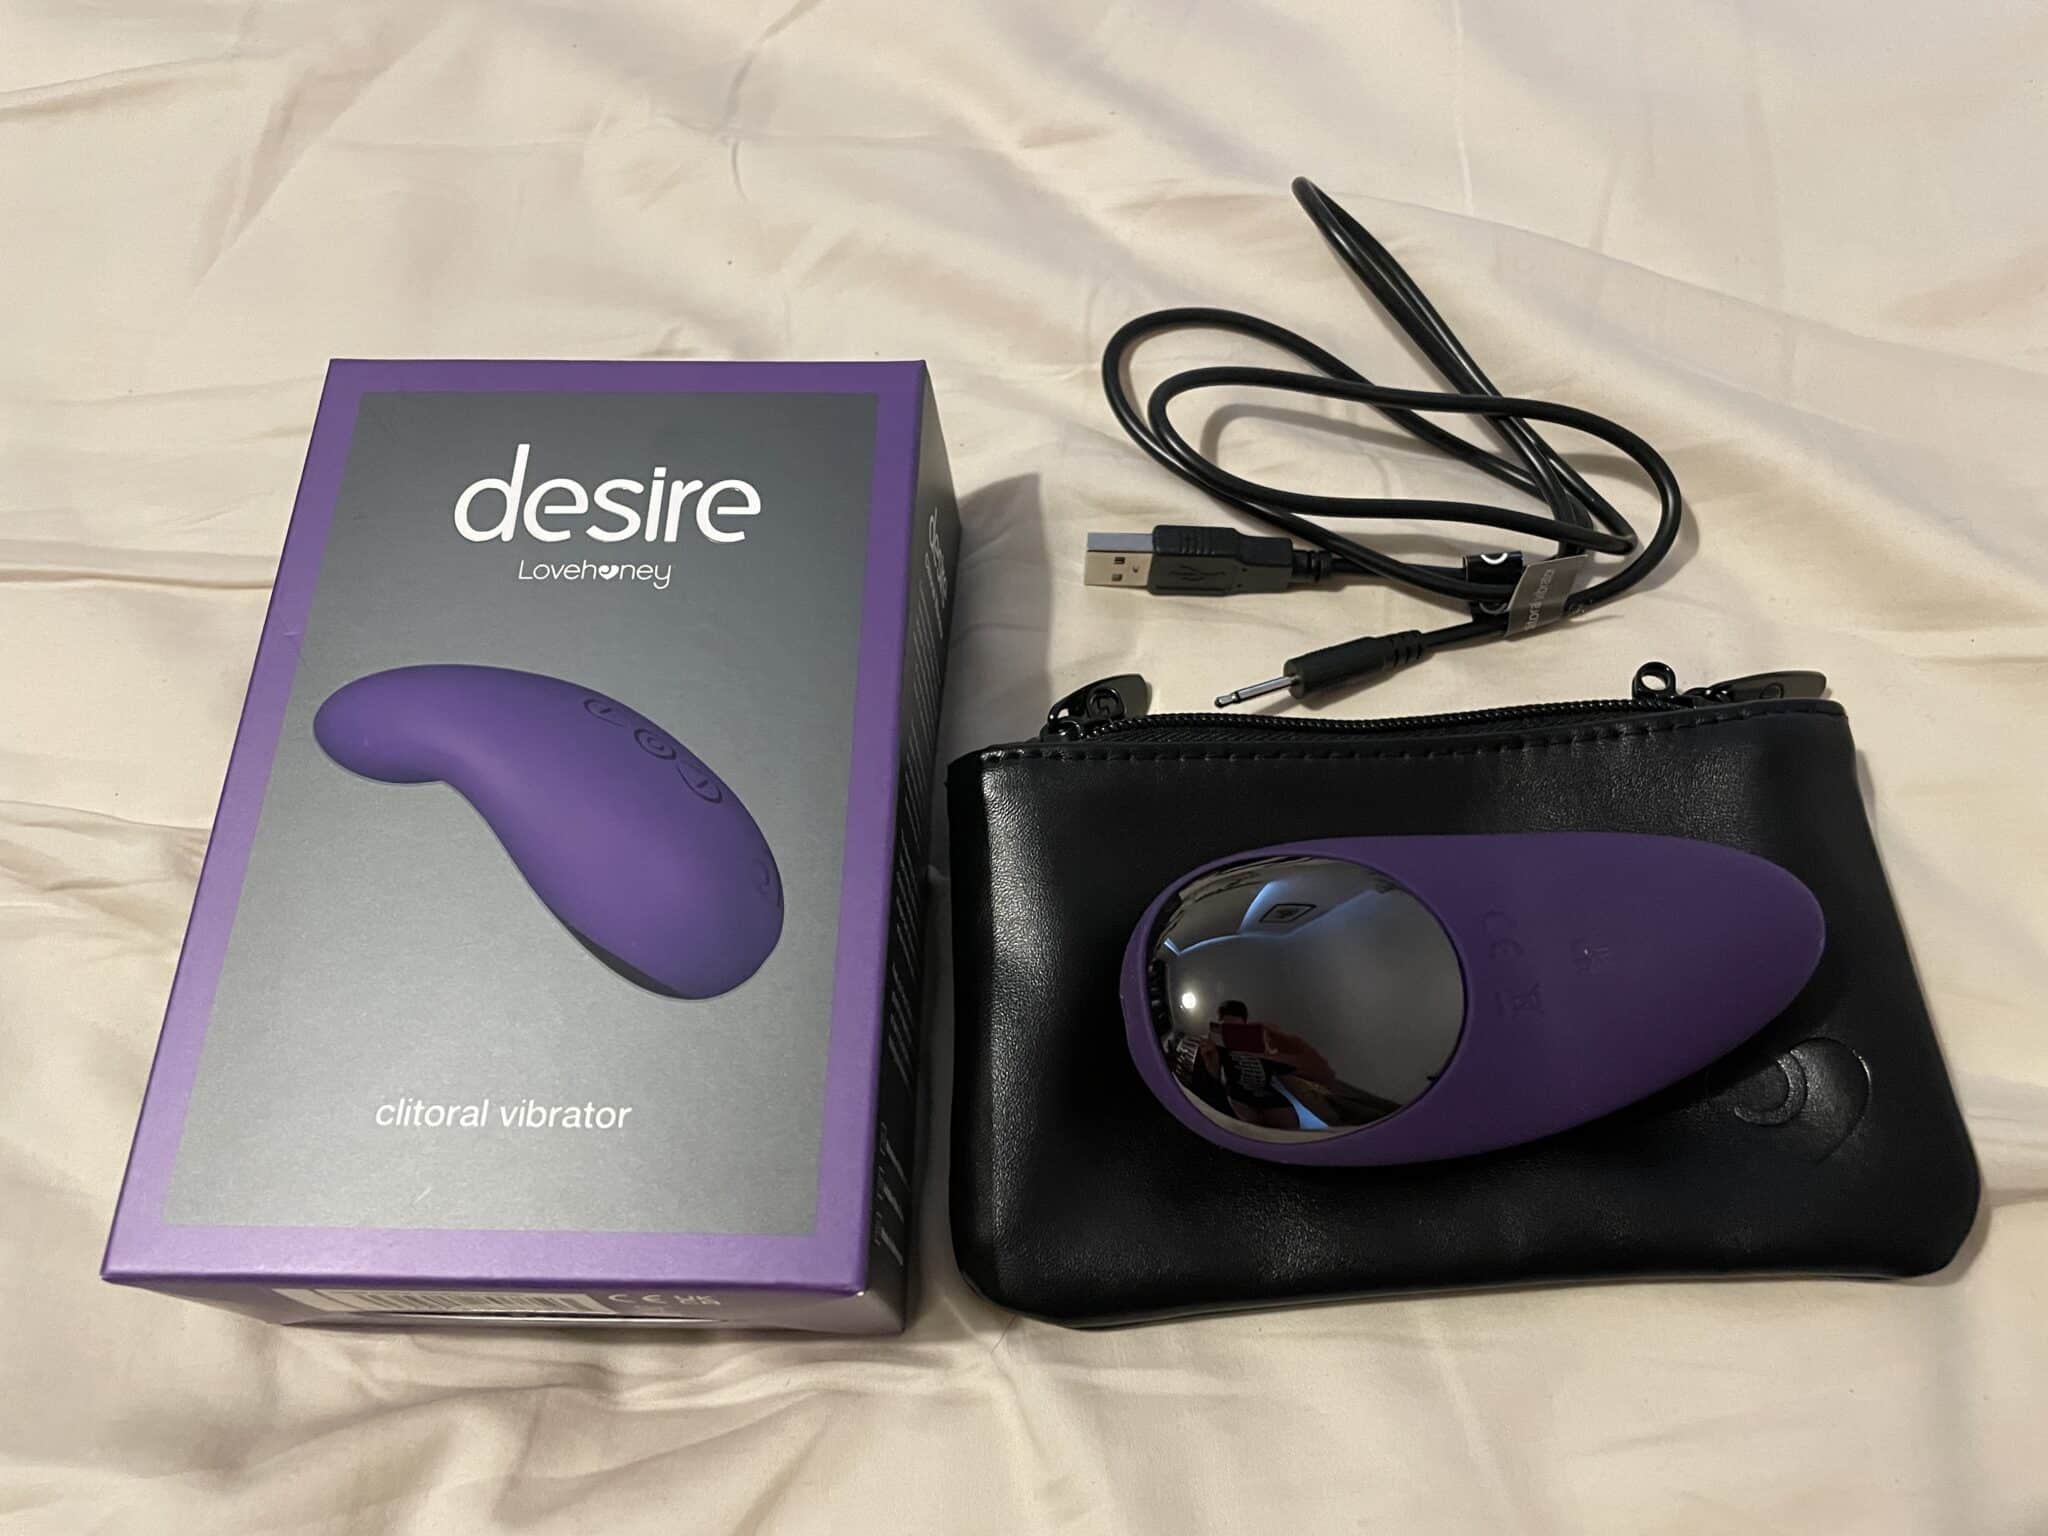 Lovehoney Desire Luxury Clitoral Vibrator The Art of Presentation: The Lovehoney Desire Luxury Rechargeable Clitoral Vibrator’s Packaging